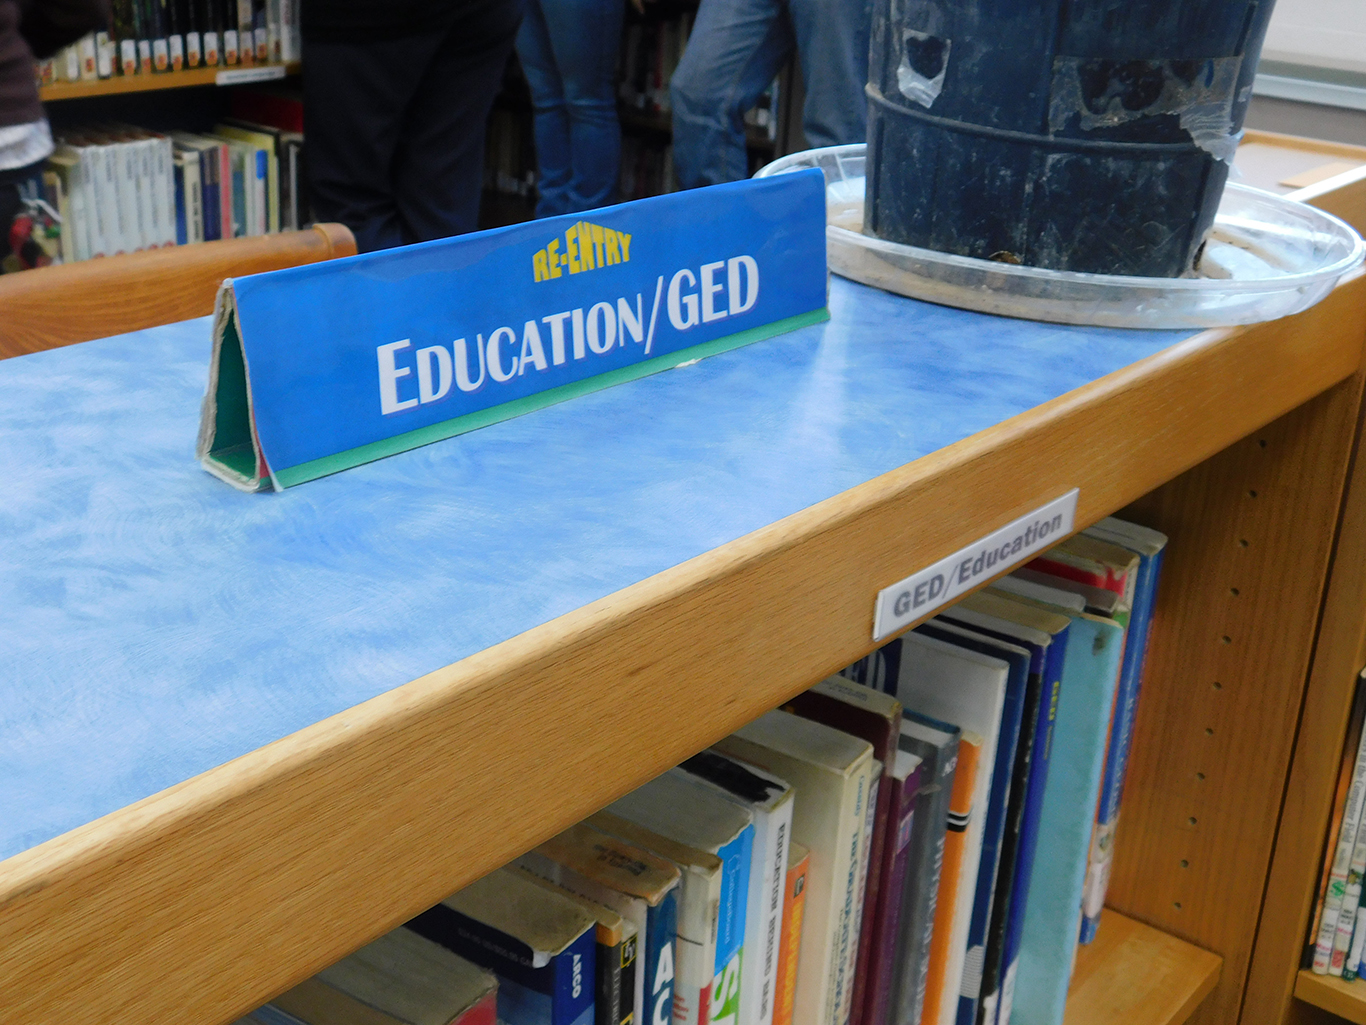 A bookshelf with education and GED books